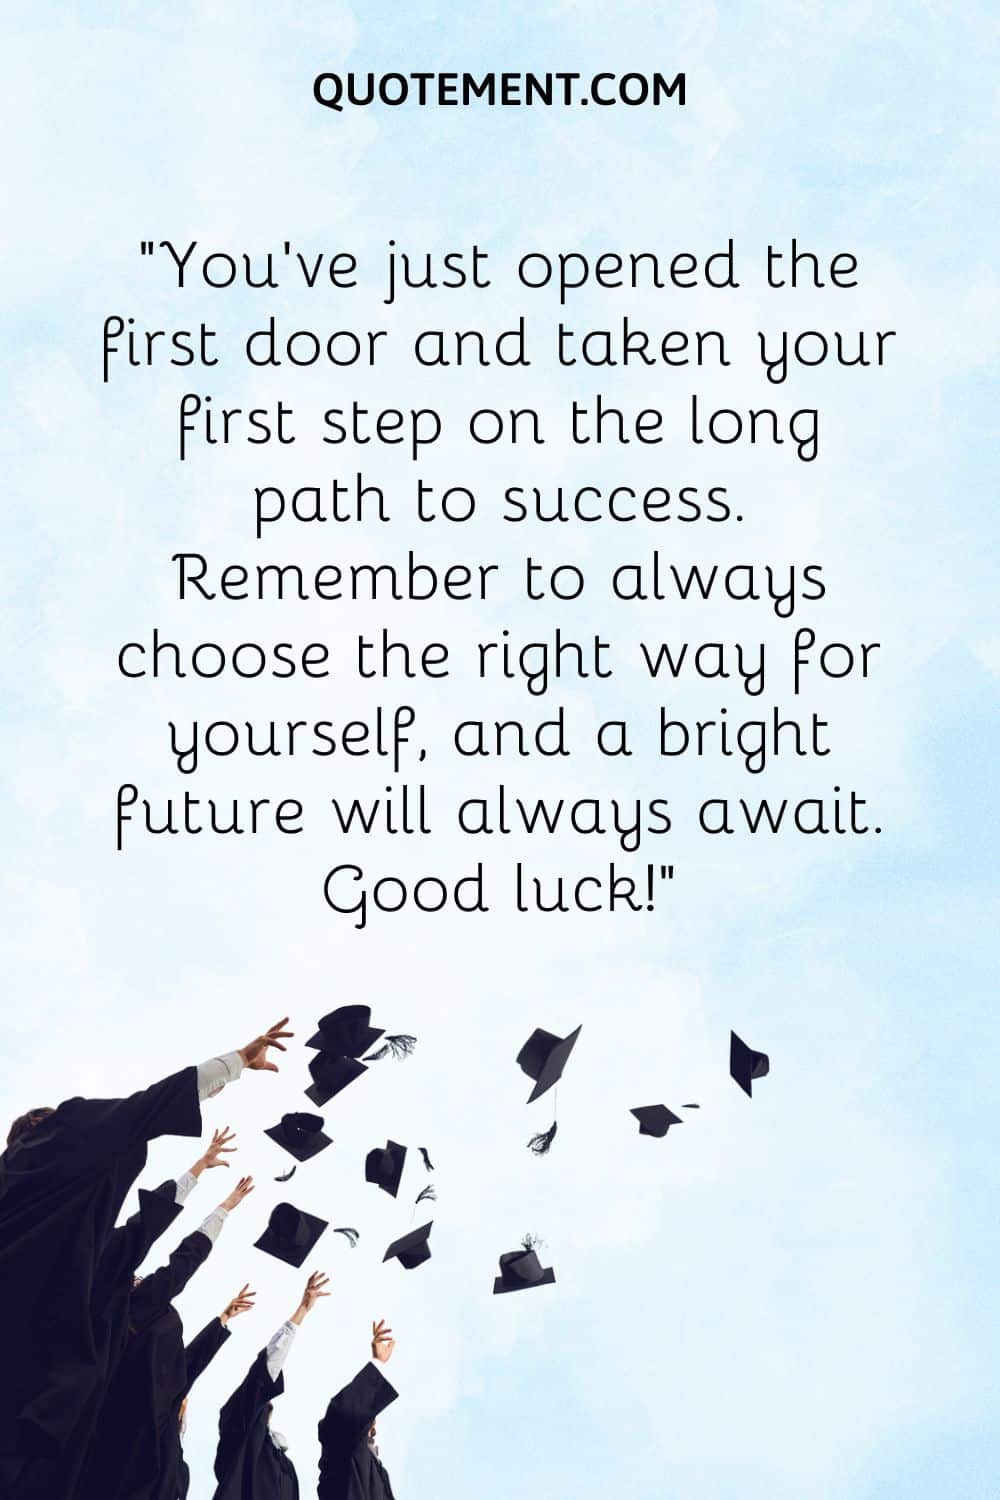 You've just opened the first door and taken your first step on the long path to success. Remember to always choose the right way for yourself, and a bright future will always await. Good luck!